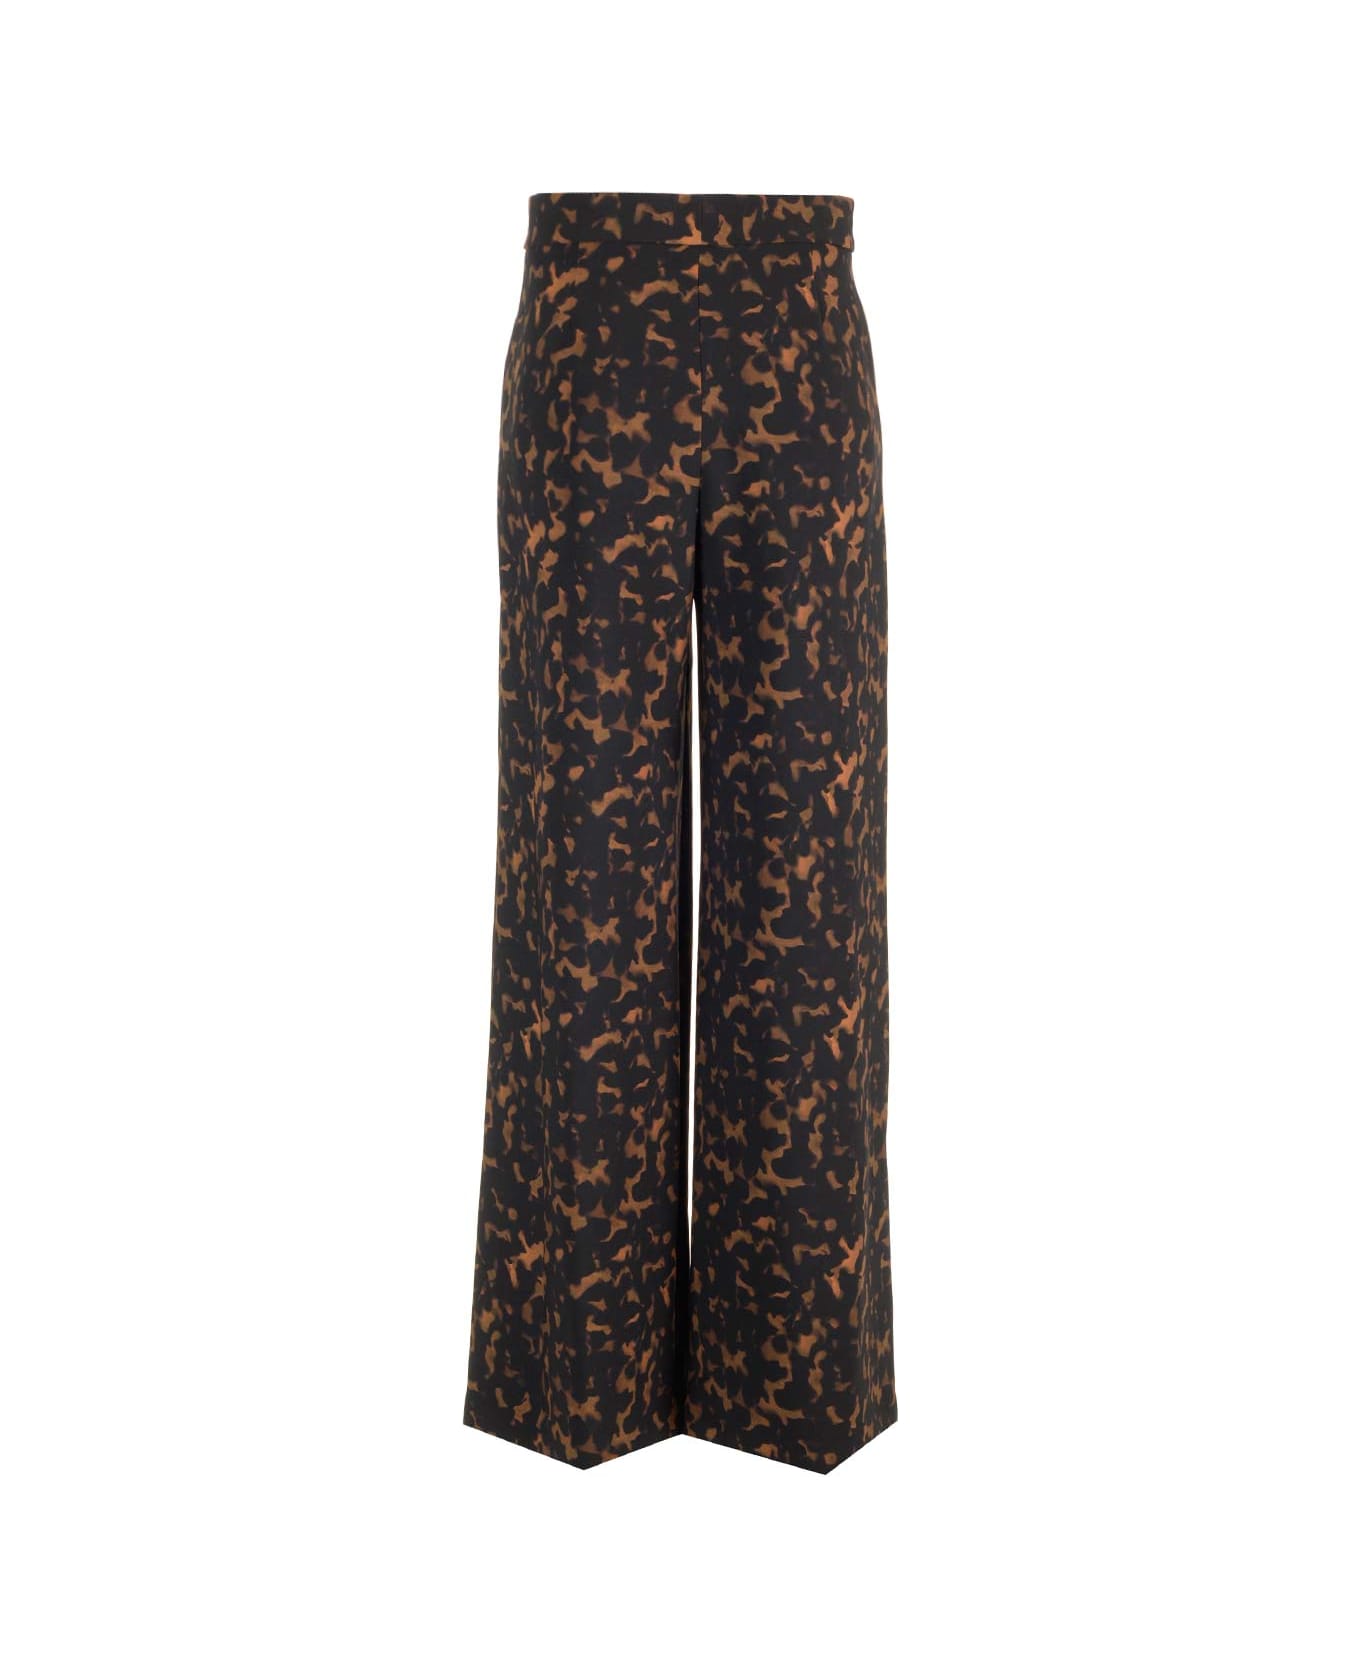 Theory High Waisted Pants - Dkh Dark Brown Multi